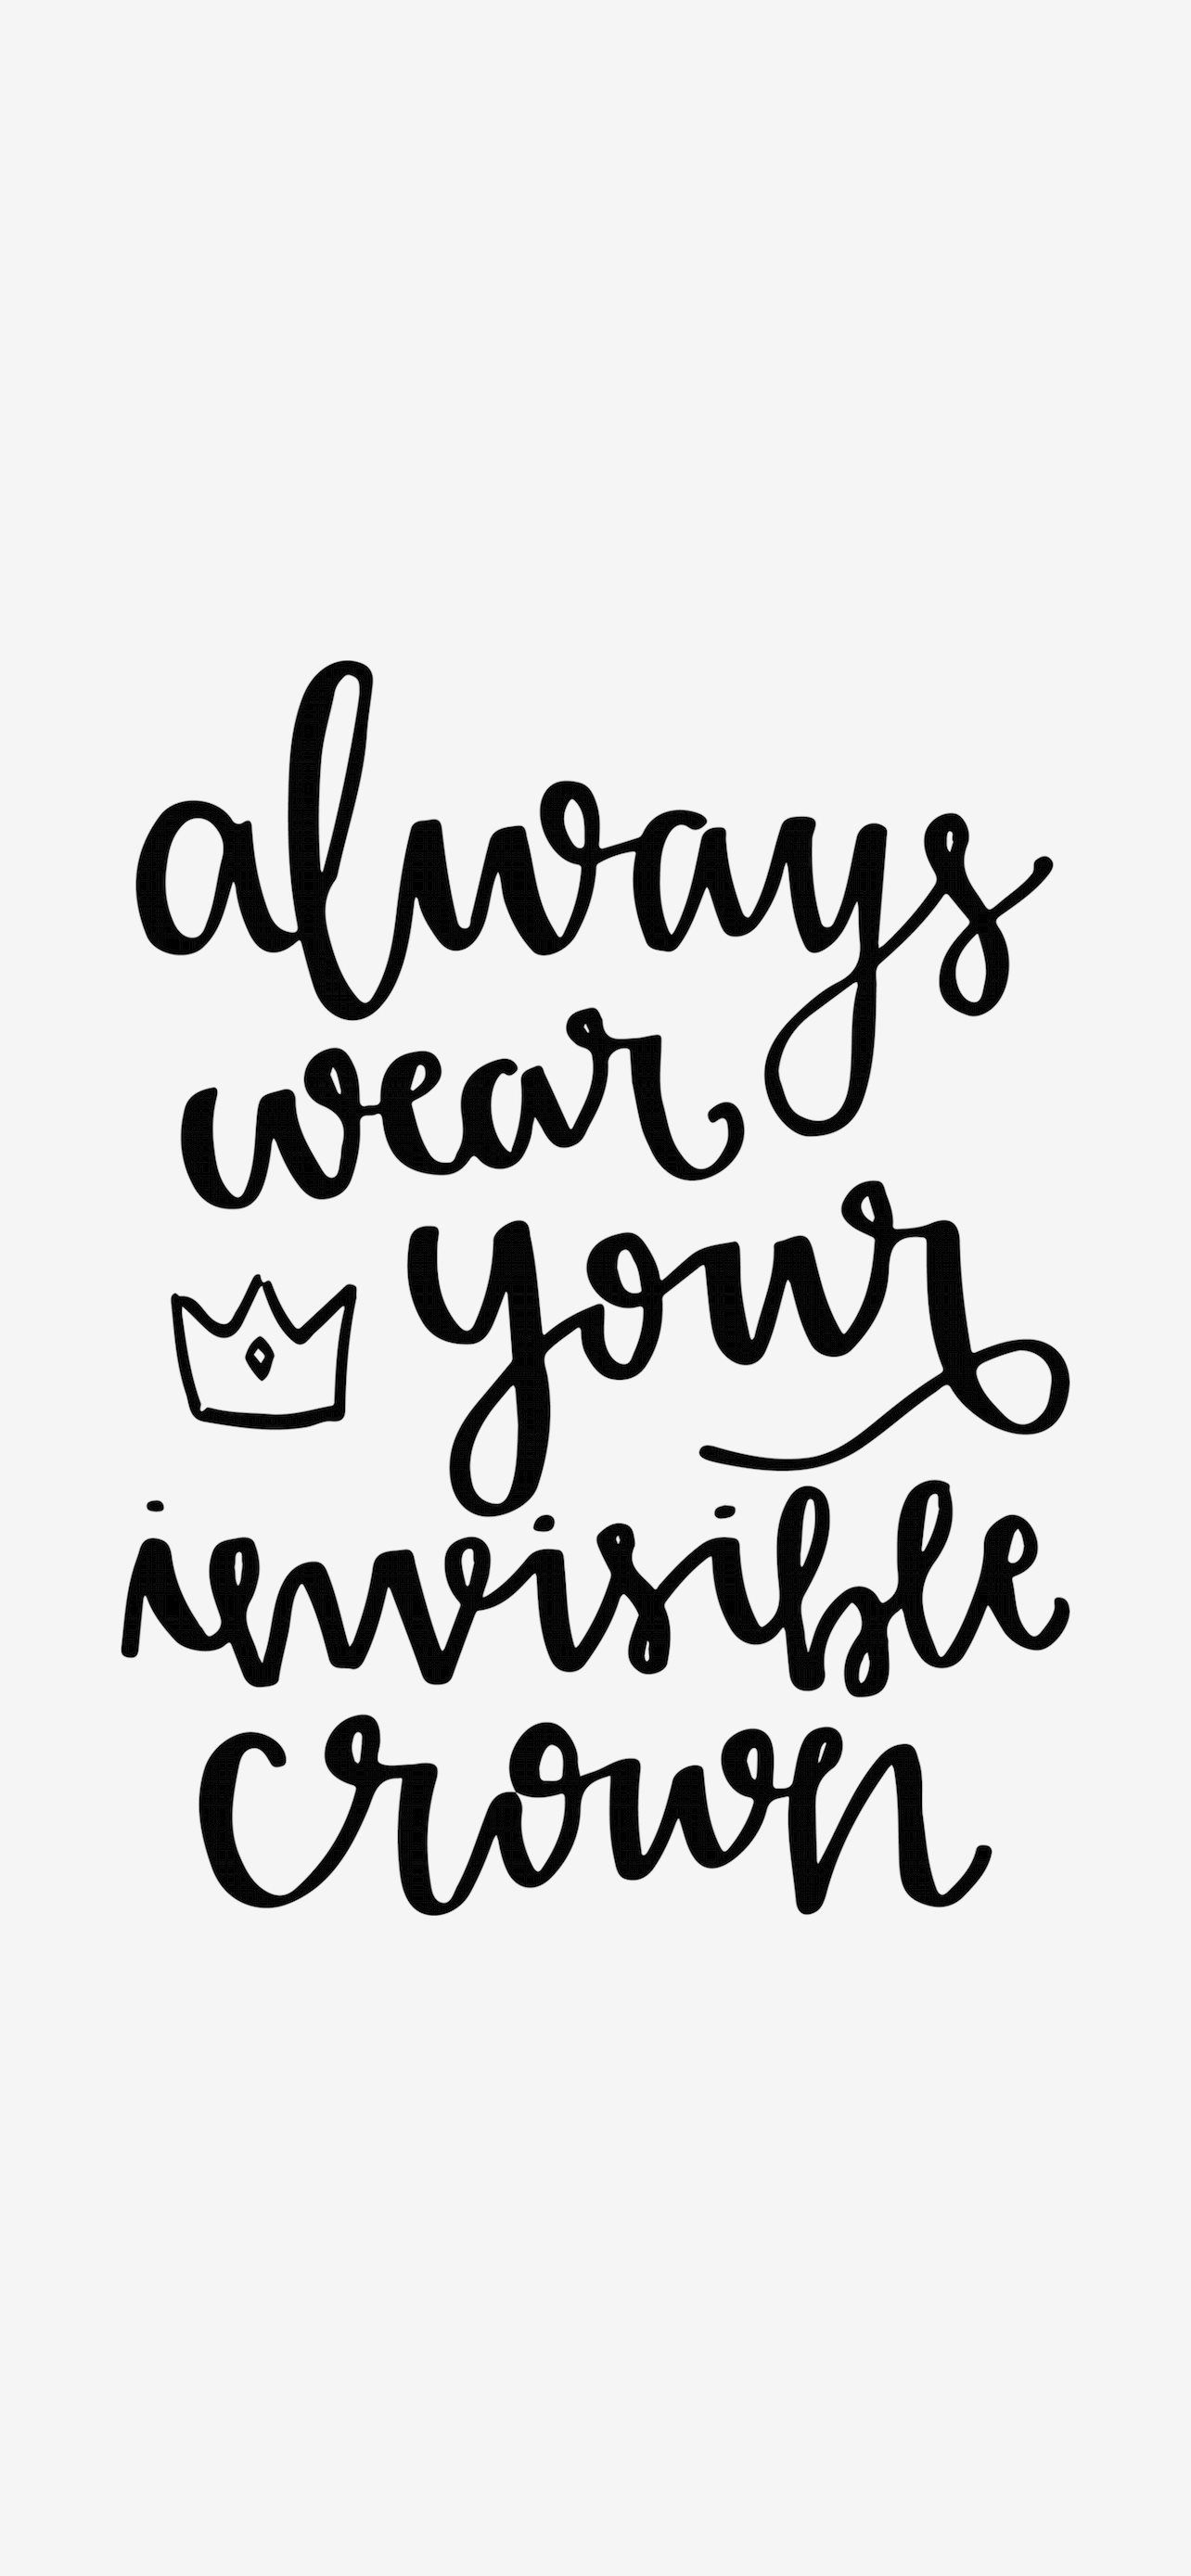 Always wear your invisible crown - Crown, quotes